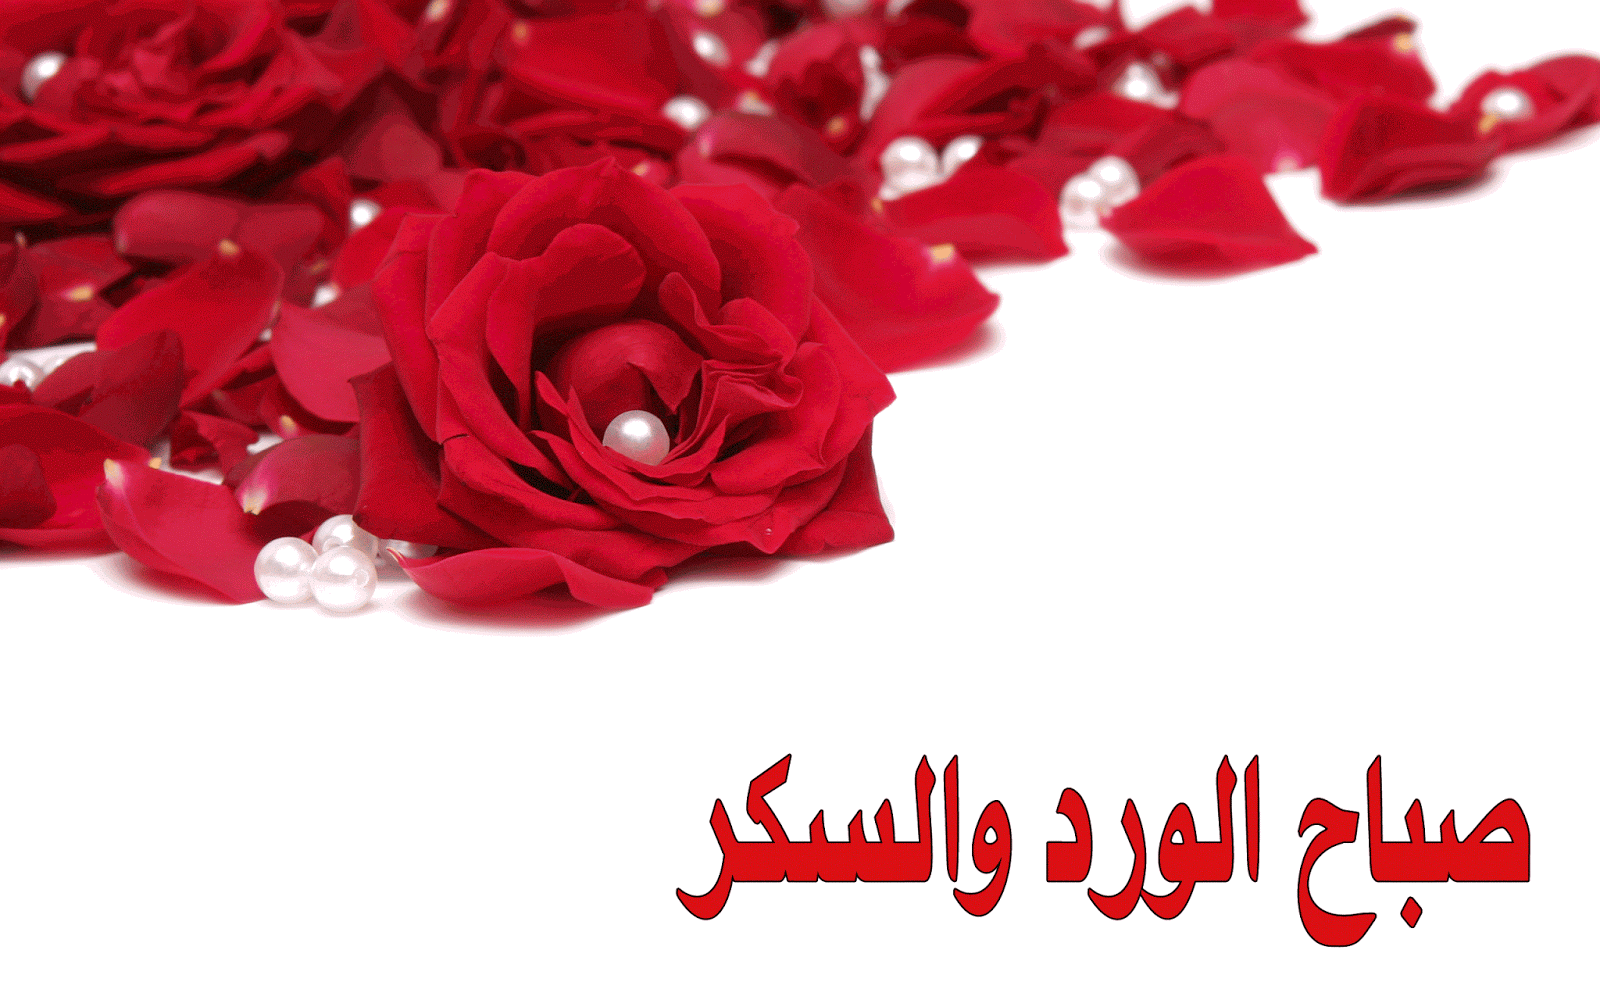 Good Morning Gif Wallpaper Free Download - Red Roses On White Background , HD Wallpaper & Backgrounds